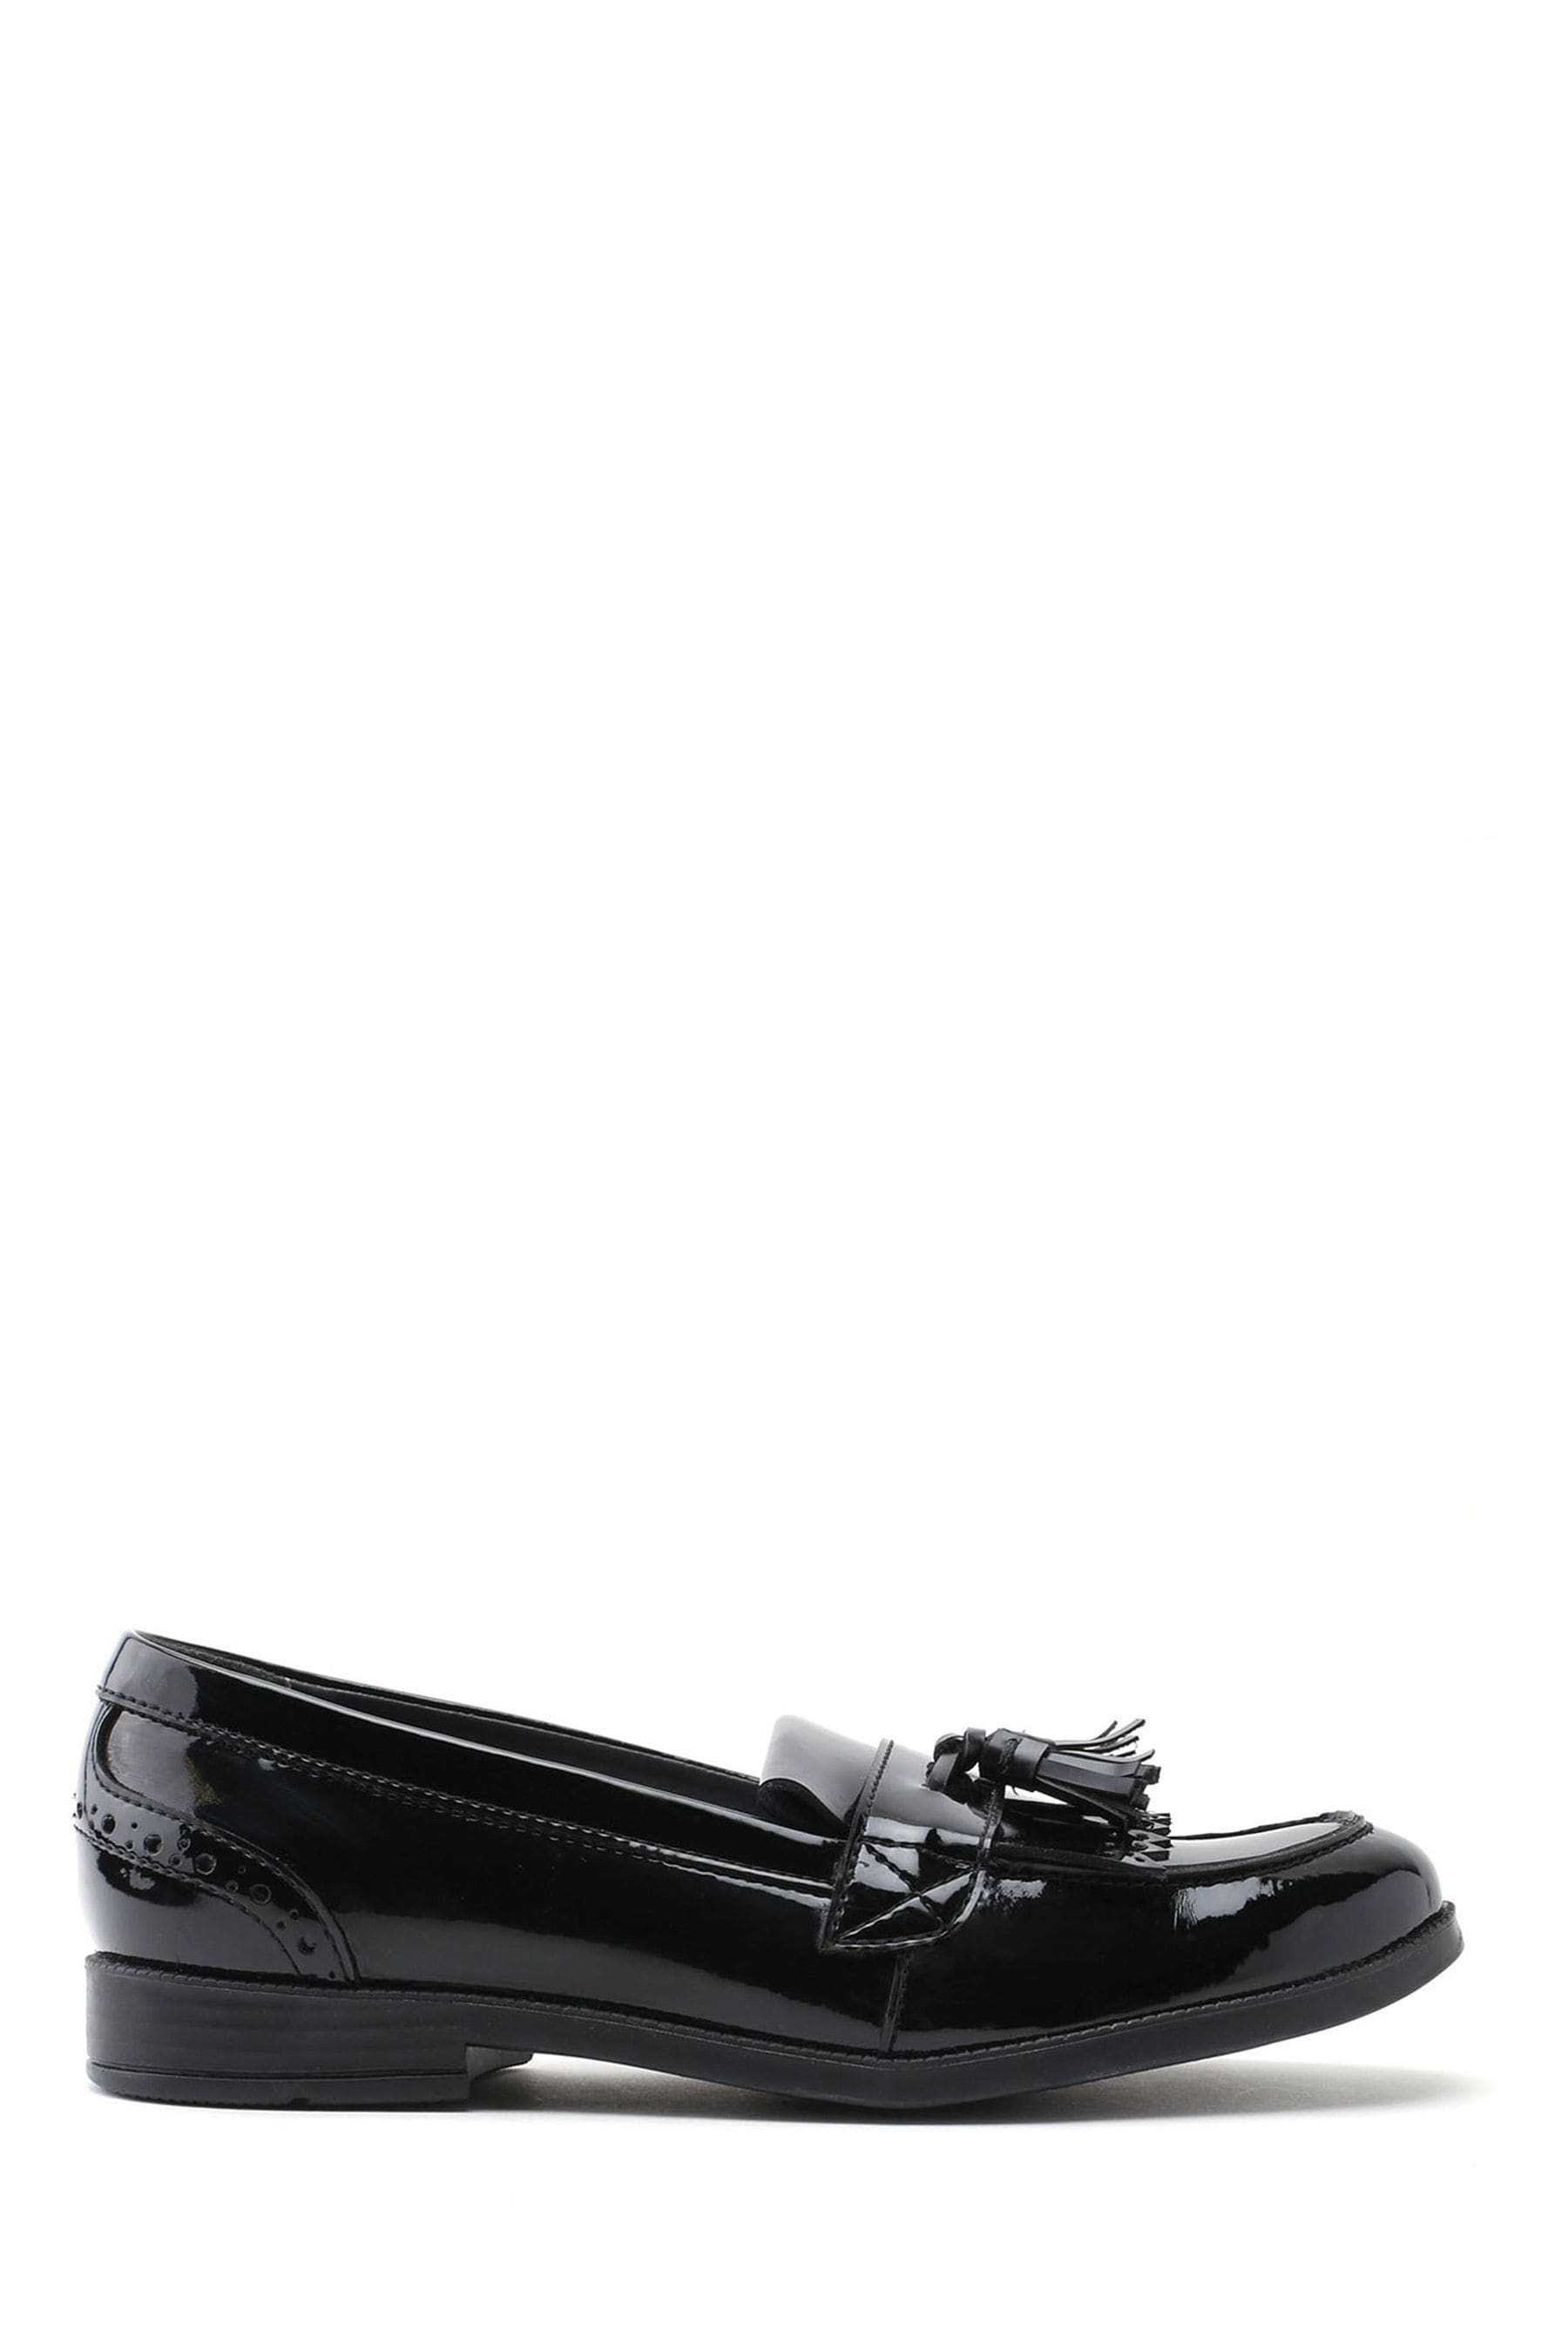 Selfridges & Co Girls Shoes Flat Shoes School Shoes Helen patent-leather school shoes 4-8 years 